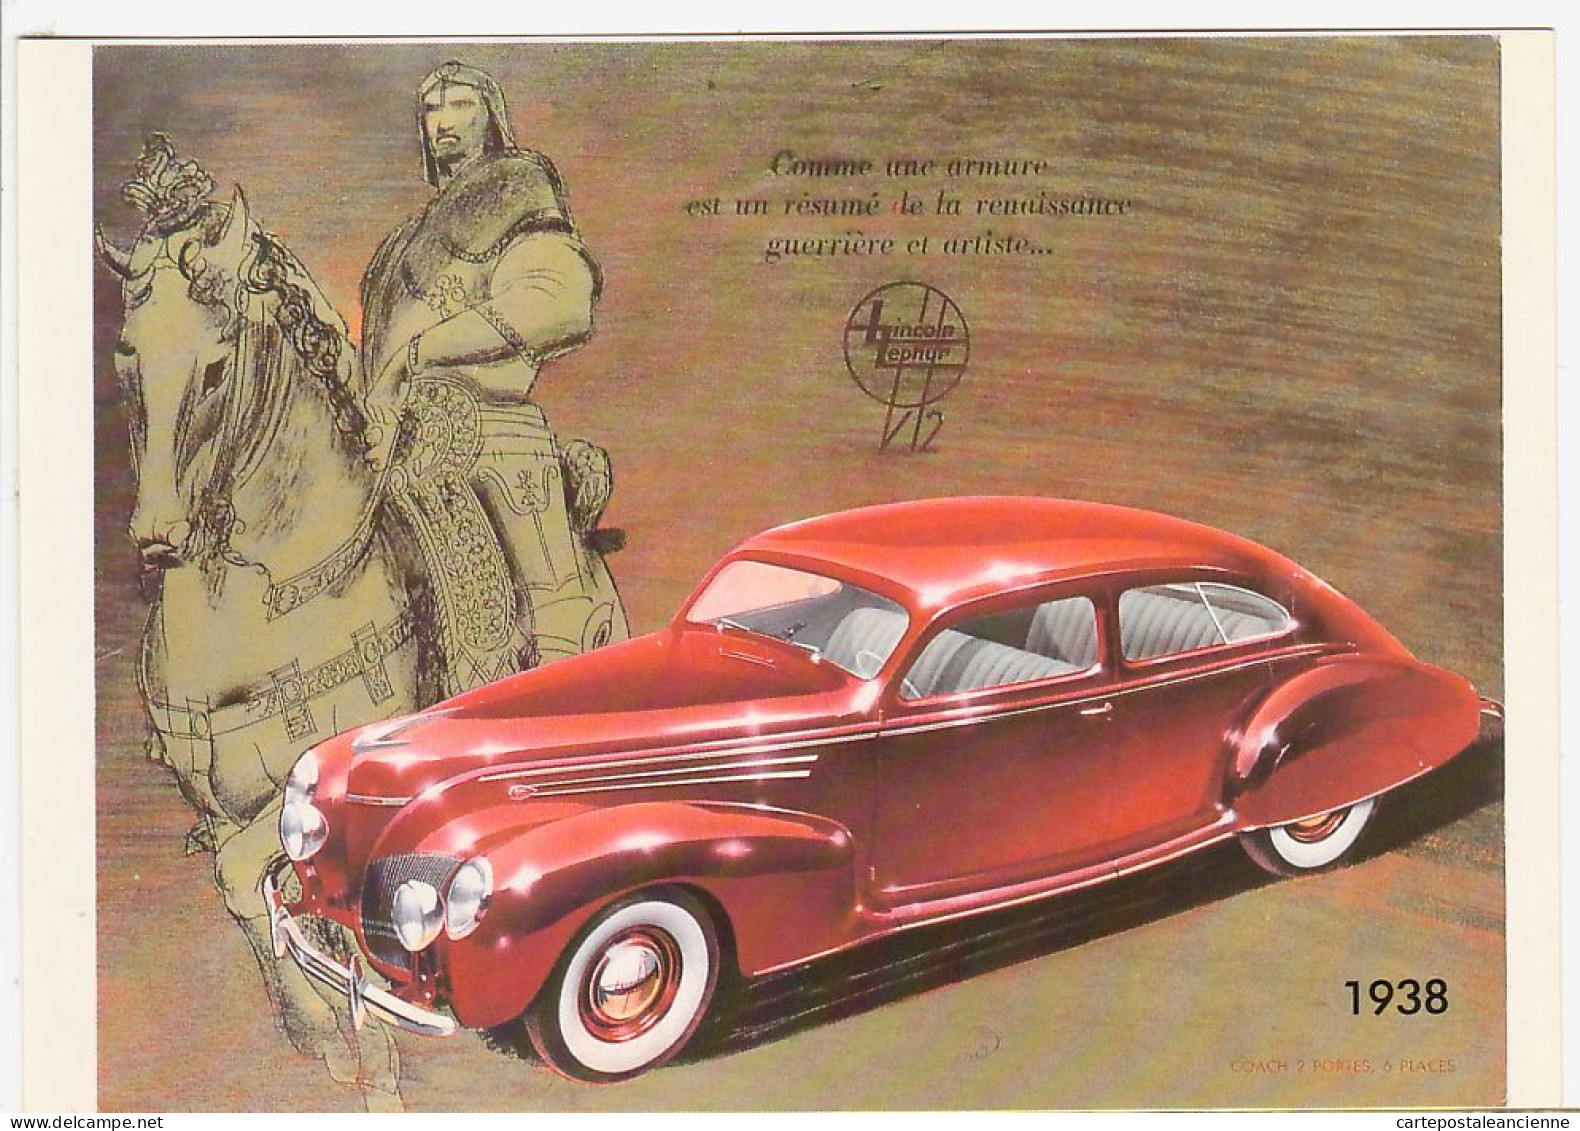 30744 / US LINCOLN ZEPHYR V12 MATFORD 1938 CPPUB 1980s Collection Bibliotheque FORNEY Paris AMORIMAGE LE LUXE N°9 - Passenger Cars